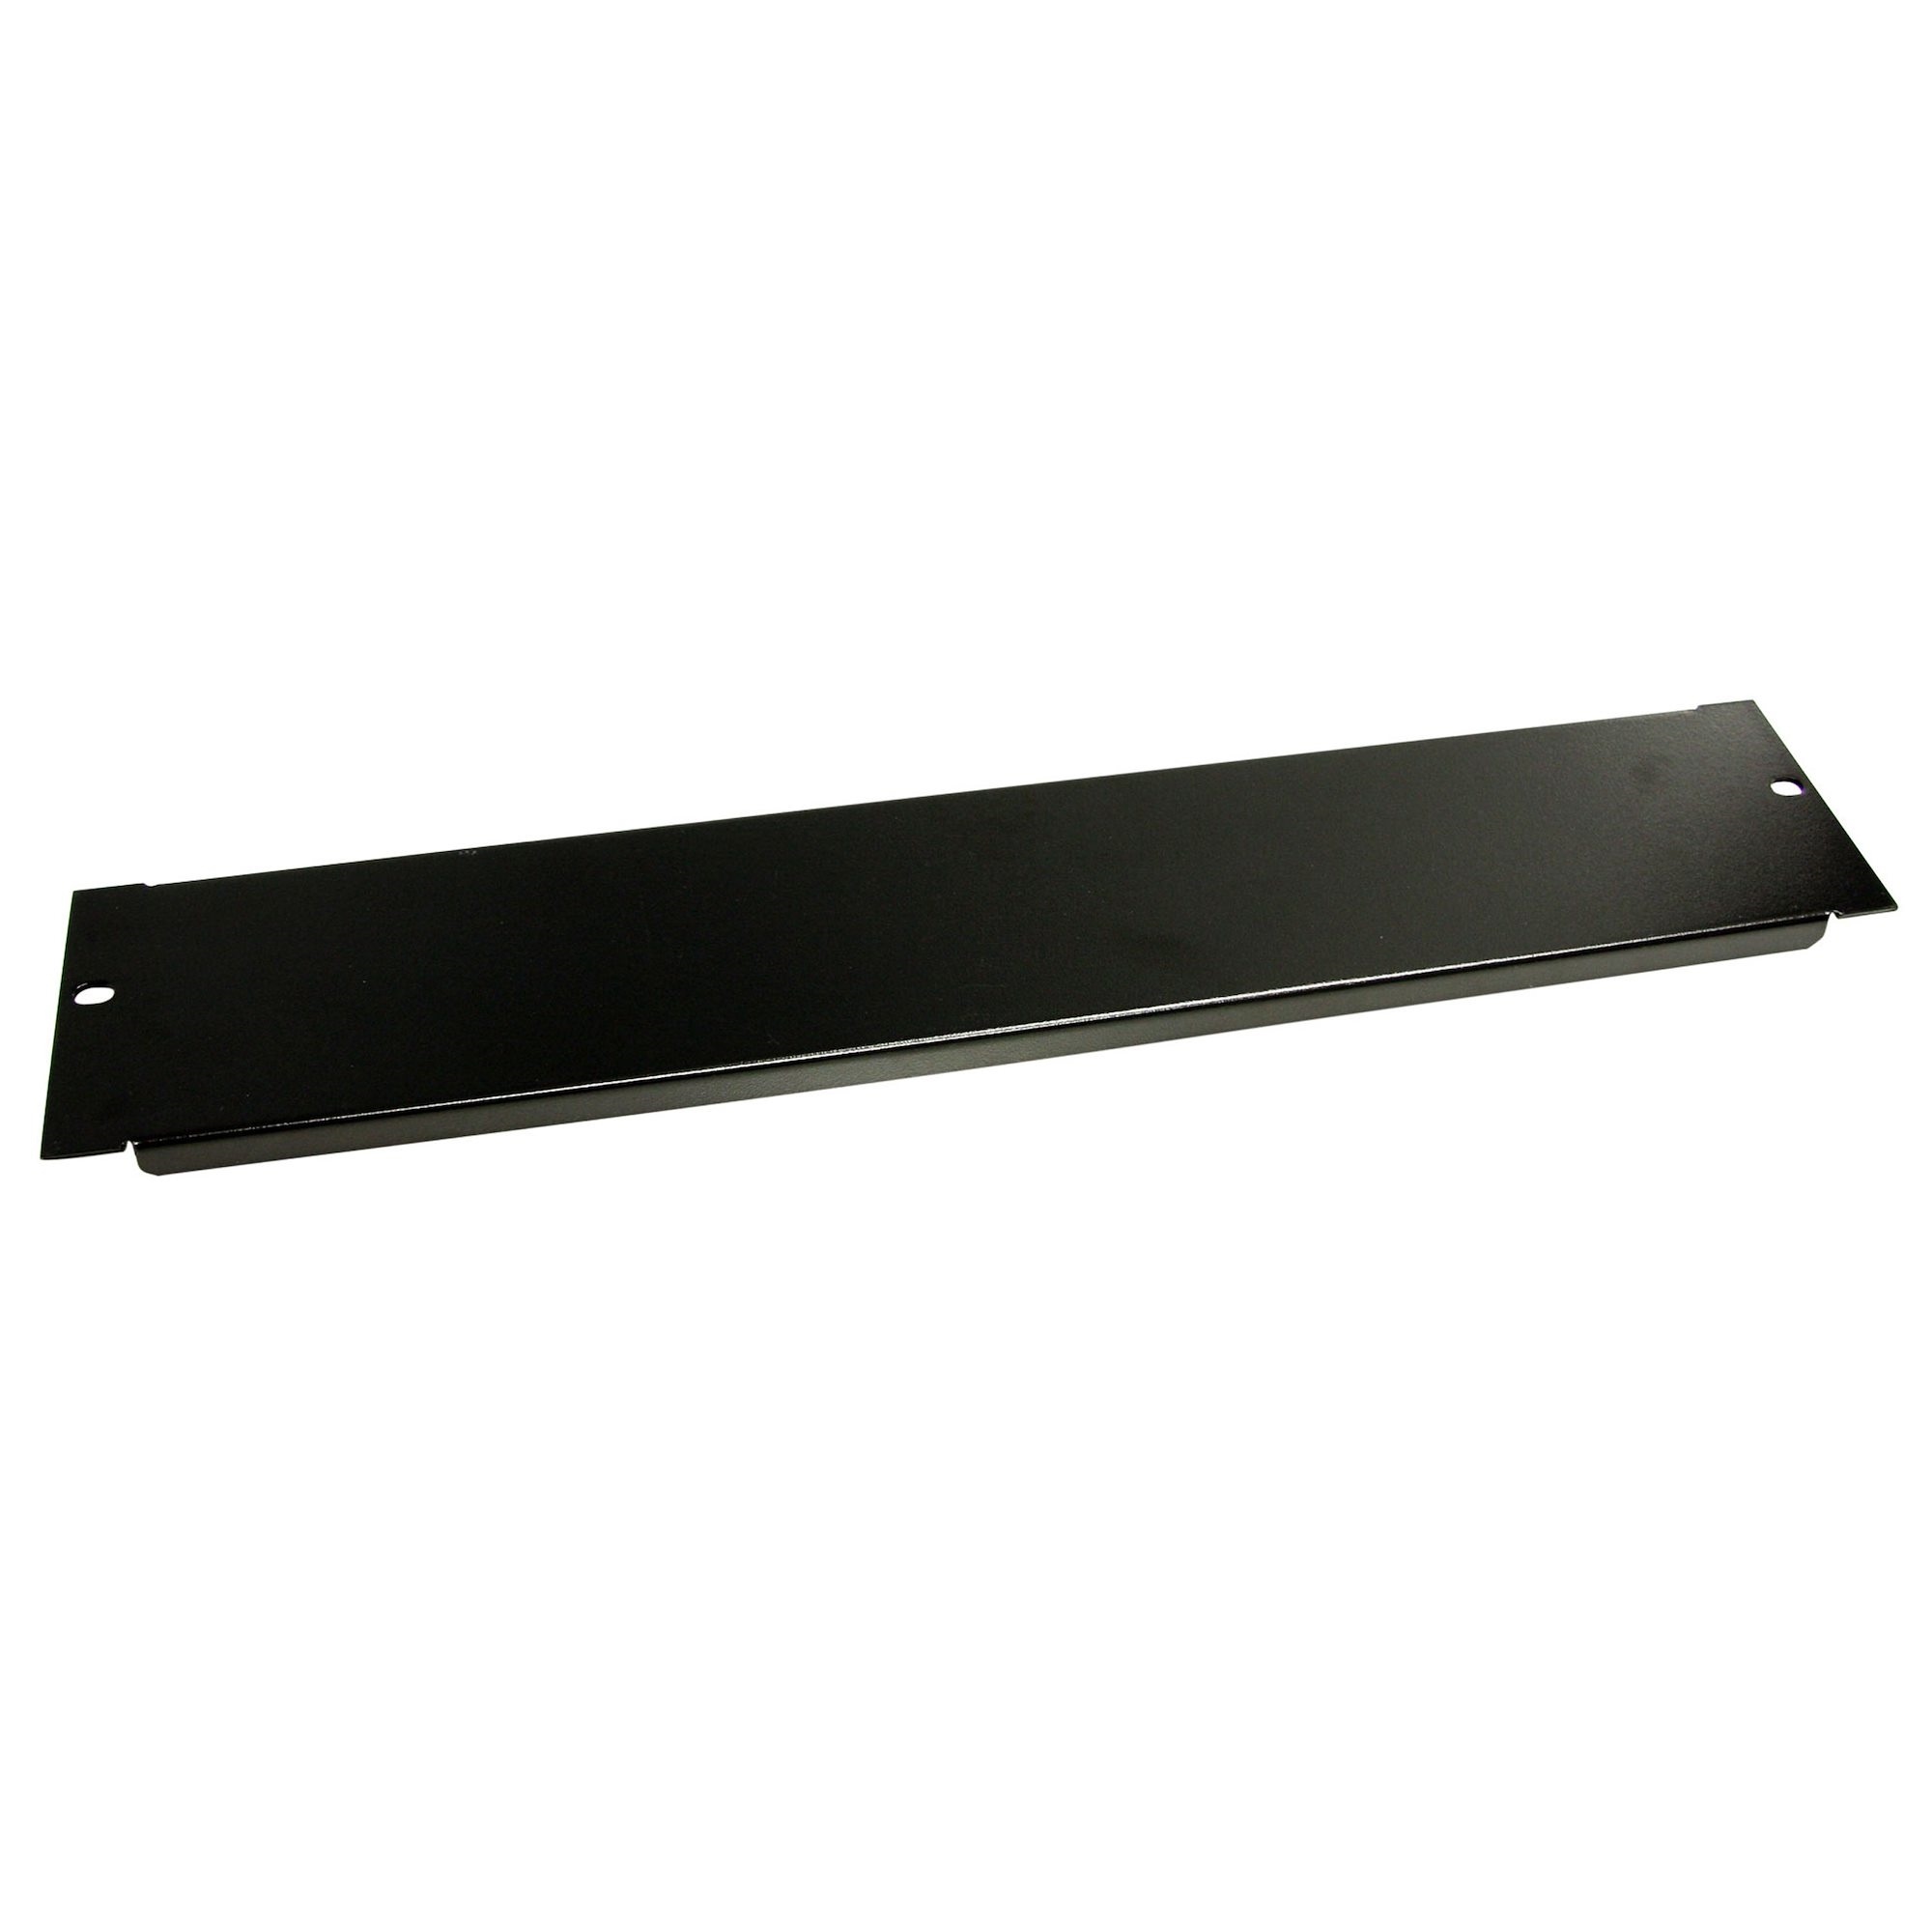 StarTech 2U Blank Panel for 19in Racks and Cabinets